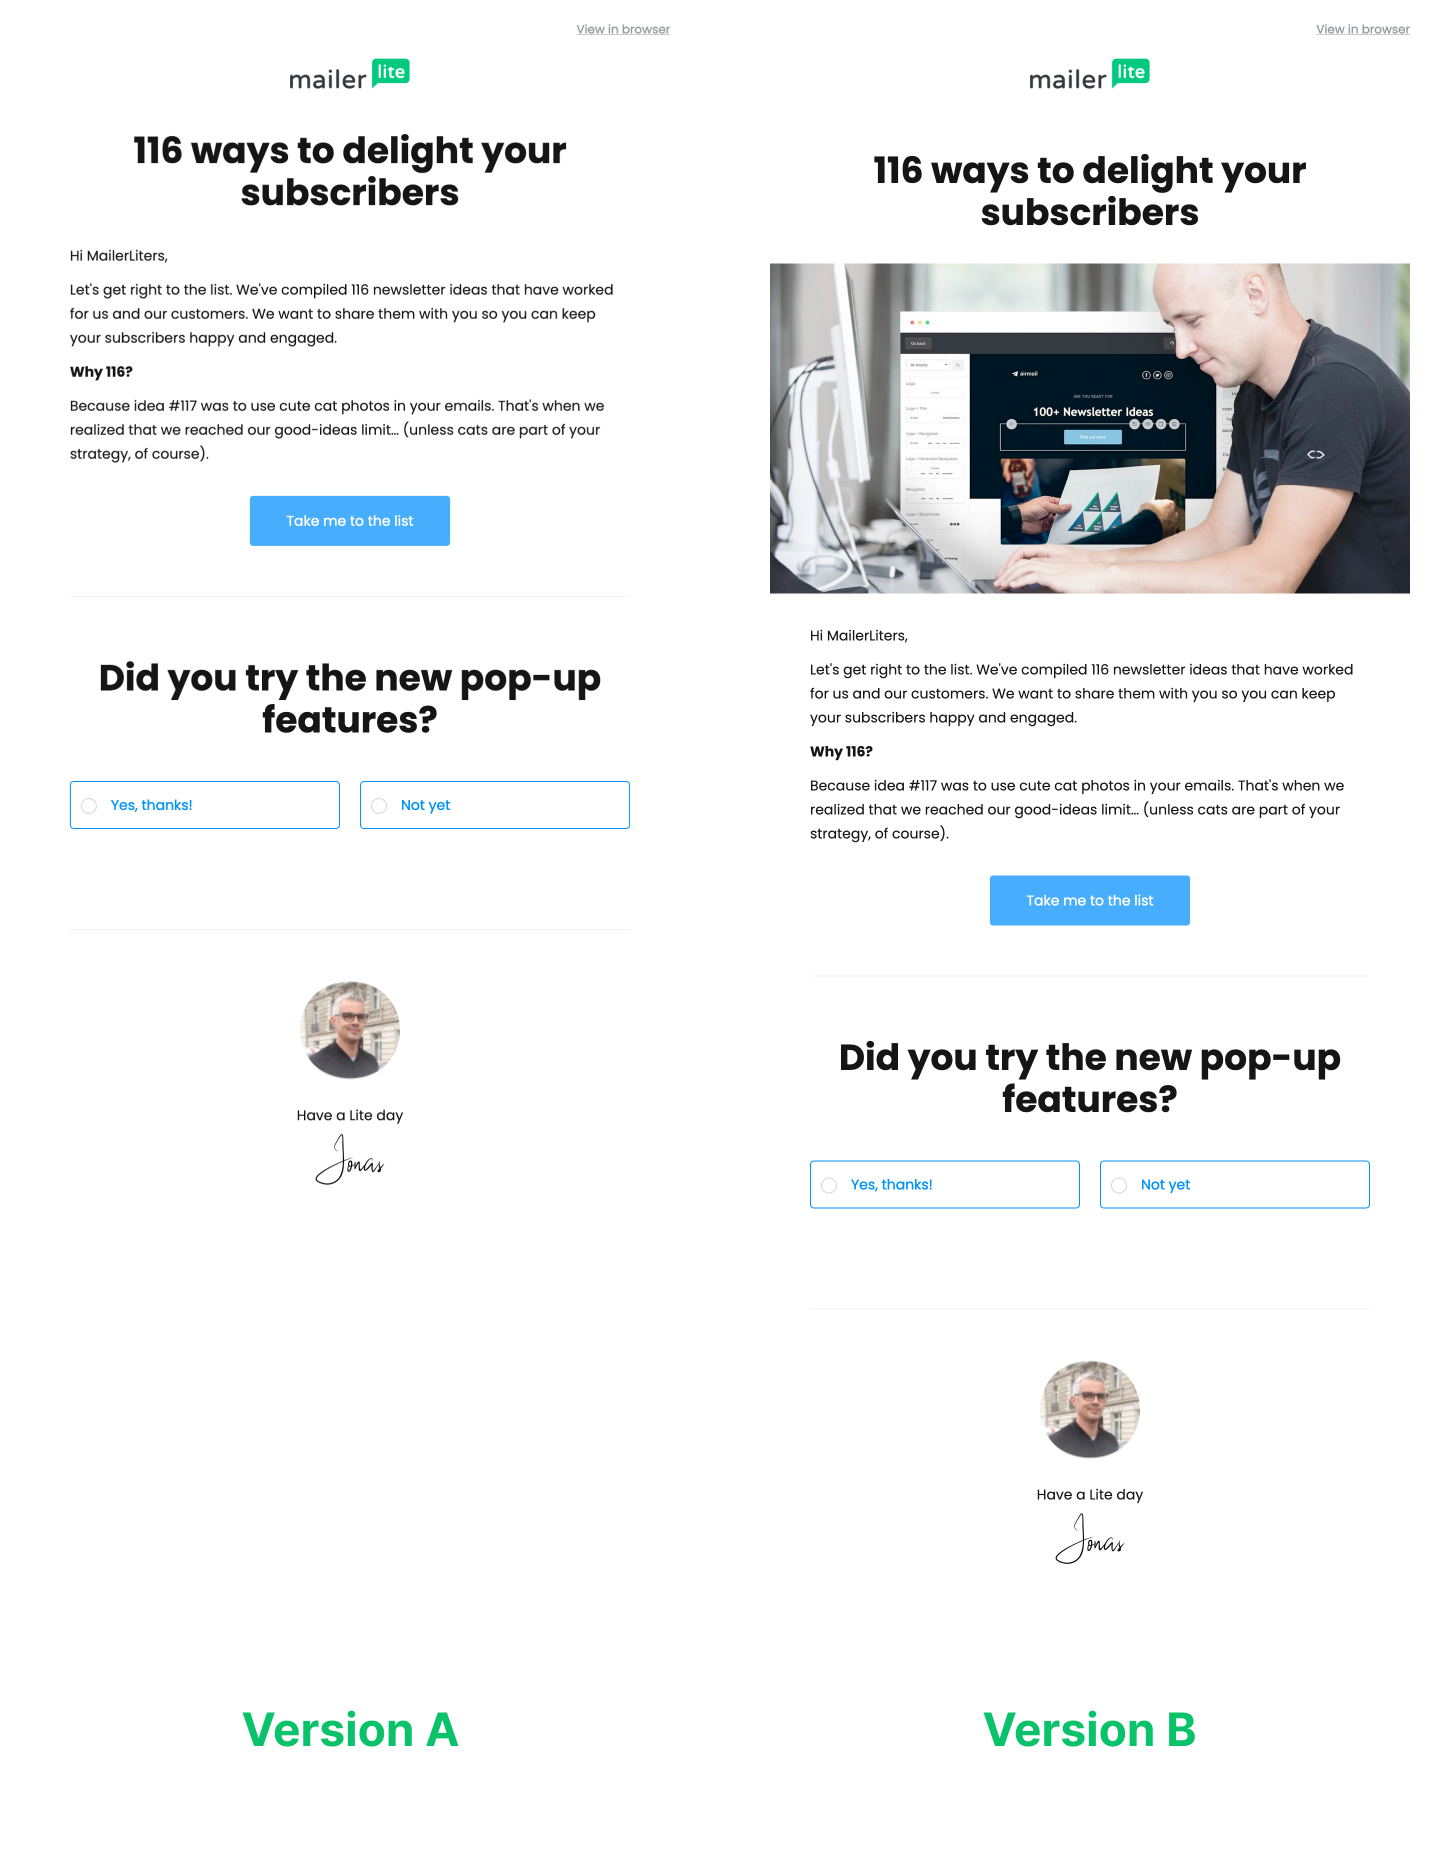 A side-by-side of two versions of the same emails used in an A/B test. One contains an image of a man and the other does not.